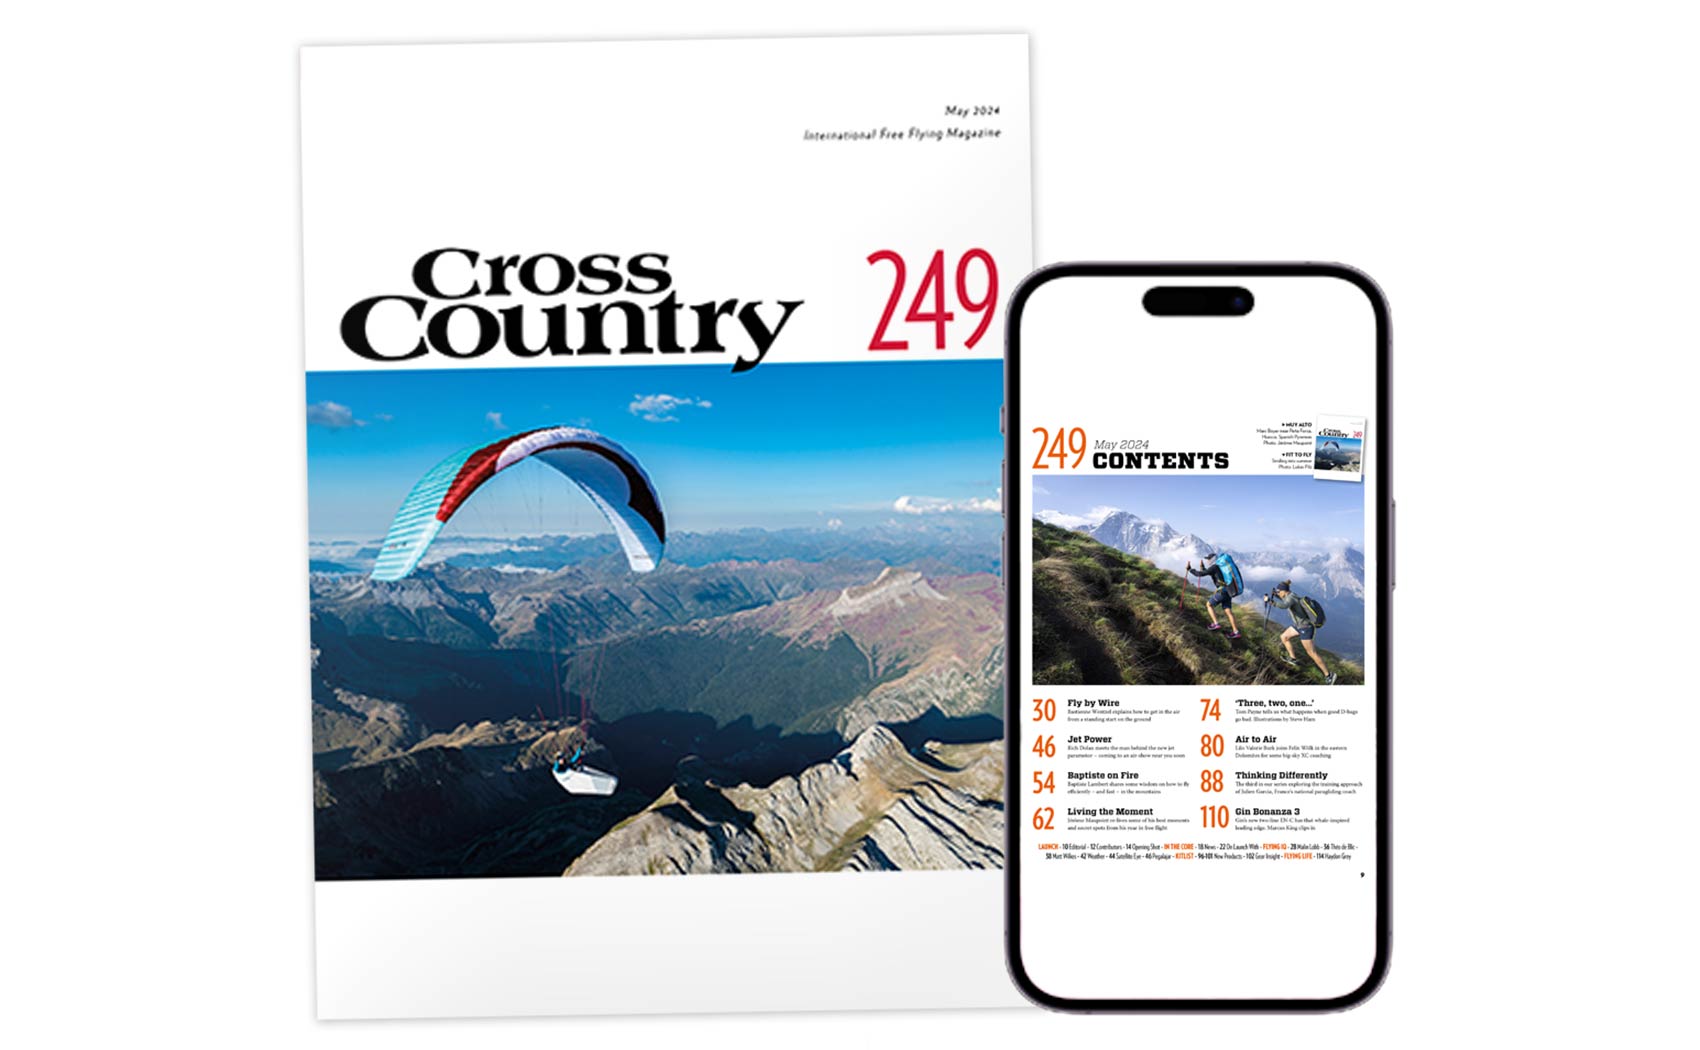 Cross Country Magazine issue 249